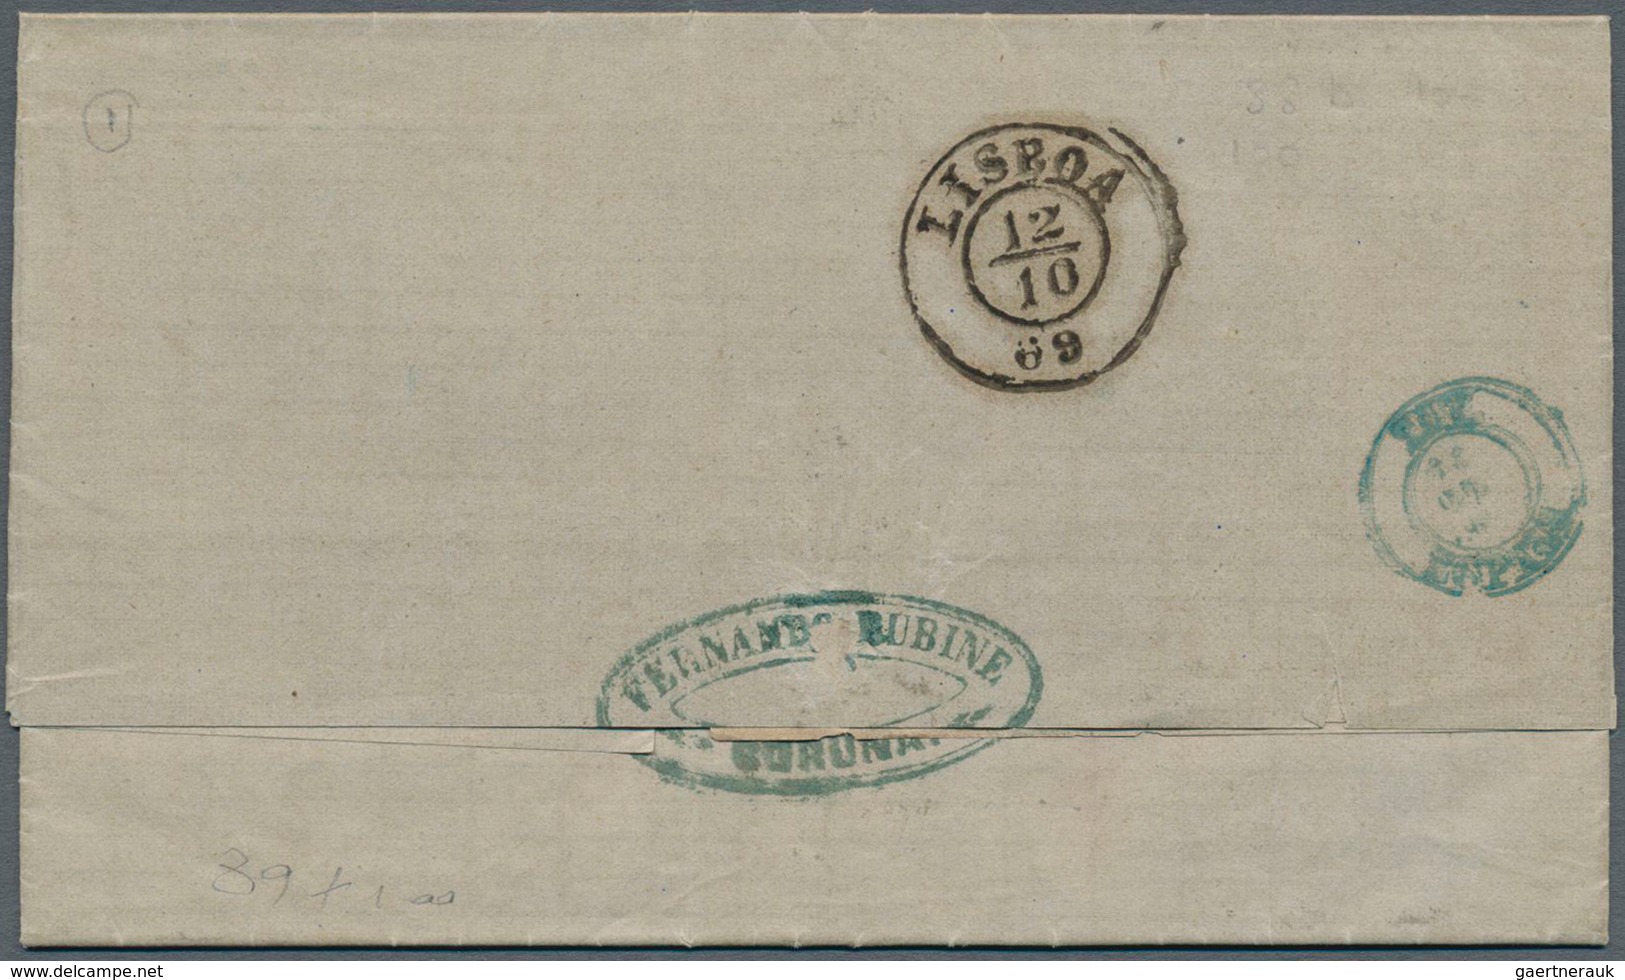 16247 Spanien: 1868 200m. Blue-green Along With 1867 12cs. Orange On Entire Letter 1869 From Coruña To Bue - Gebraucht